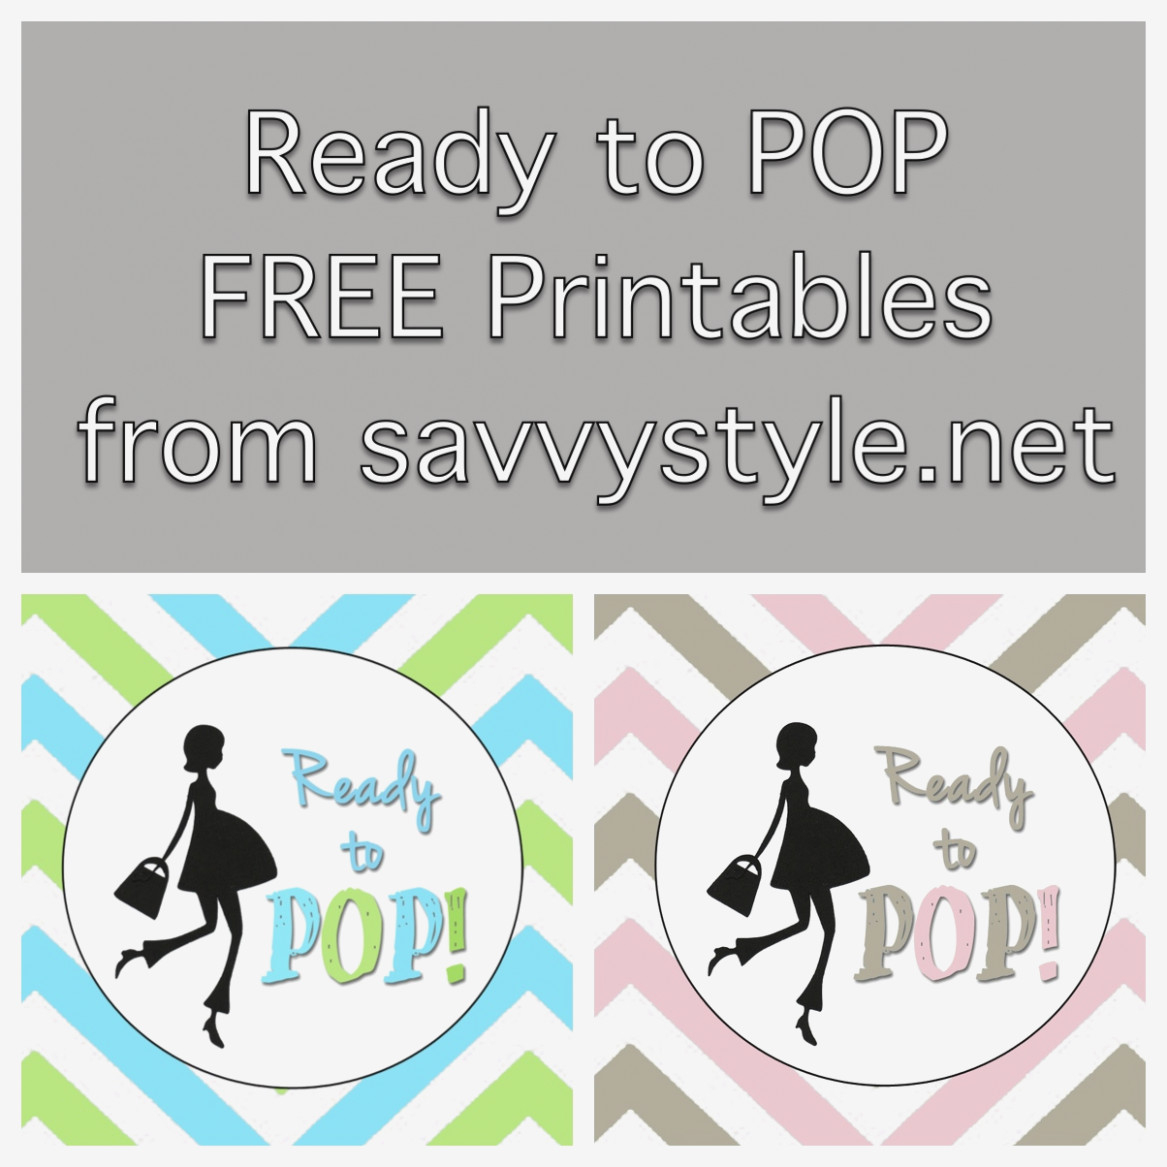 Ready To Pop Free Printables Sweetwood Creative Co. | Atlanta - Free Printable Ready To Pop Labels